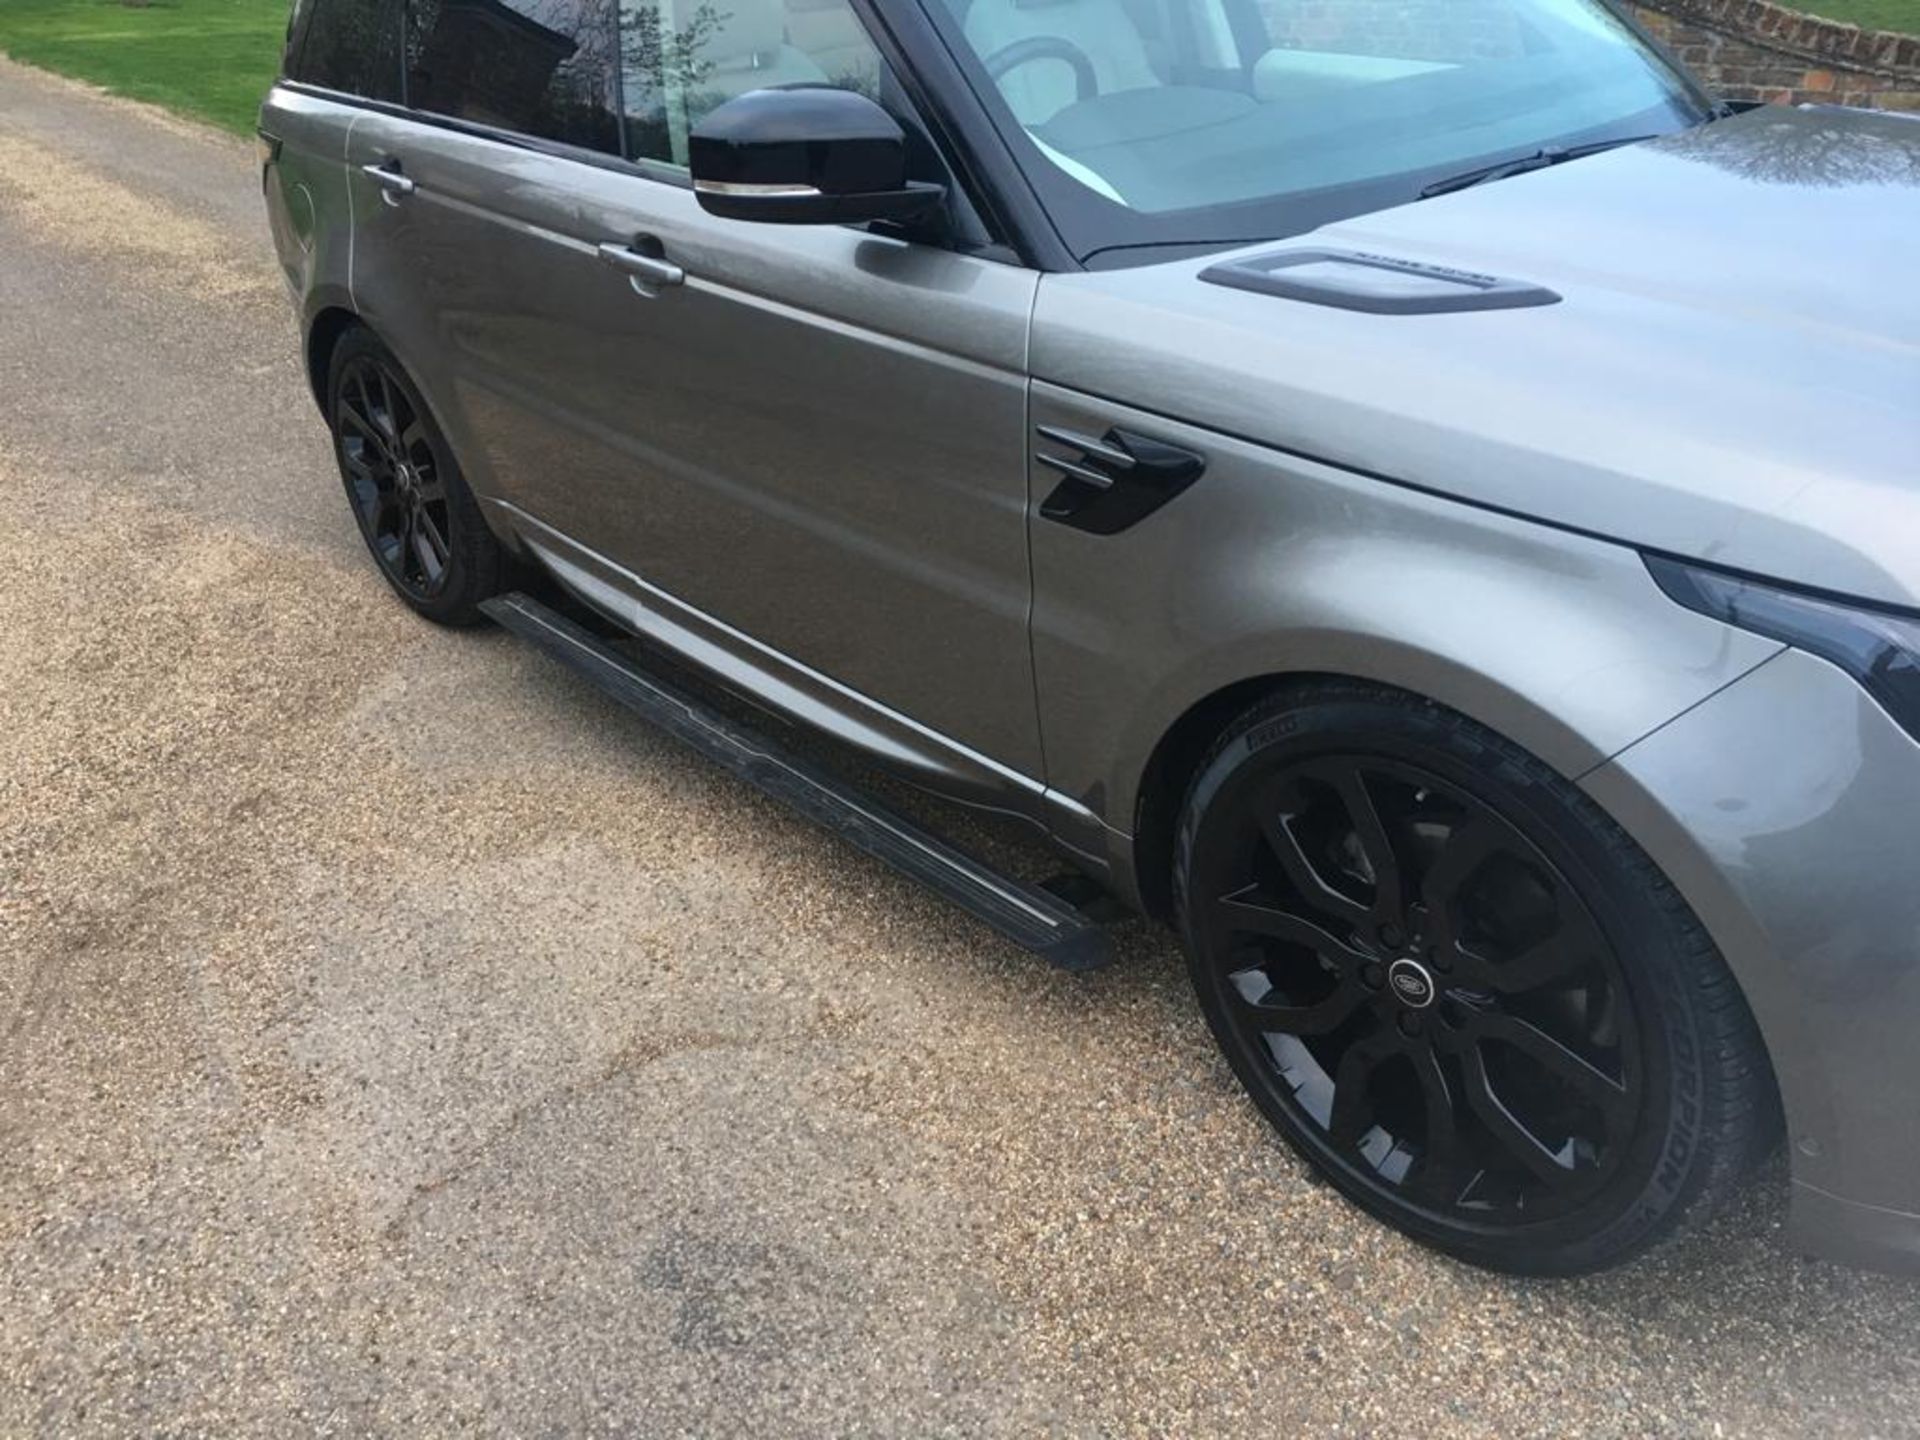 2018 RANGE ROVER SPORT 3.0 HSE DYNAMIC **ONE OWNER FROM NEW**COST £79,800 NEW LAST YEAR** - Image 11 of 26